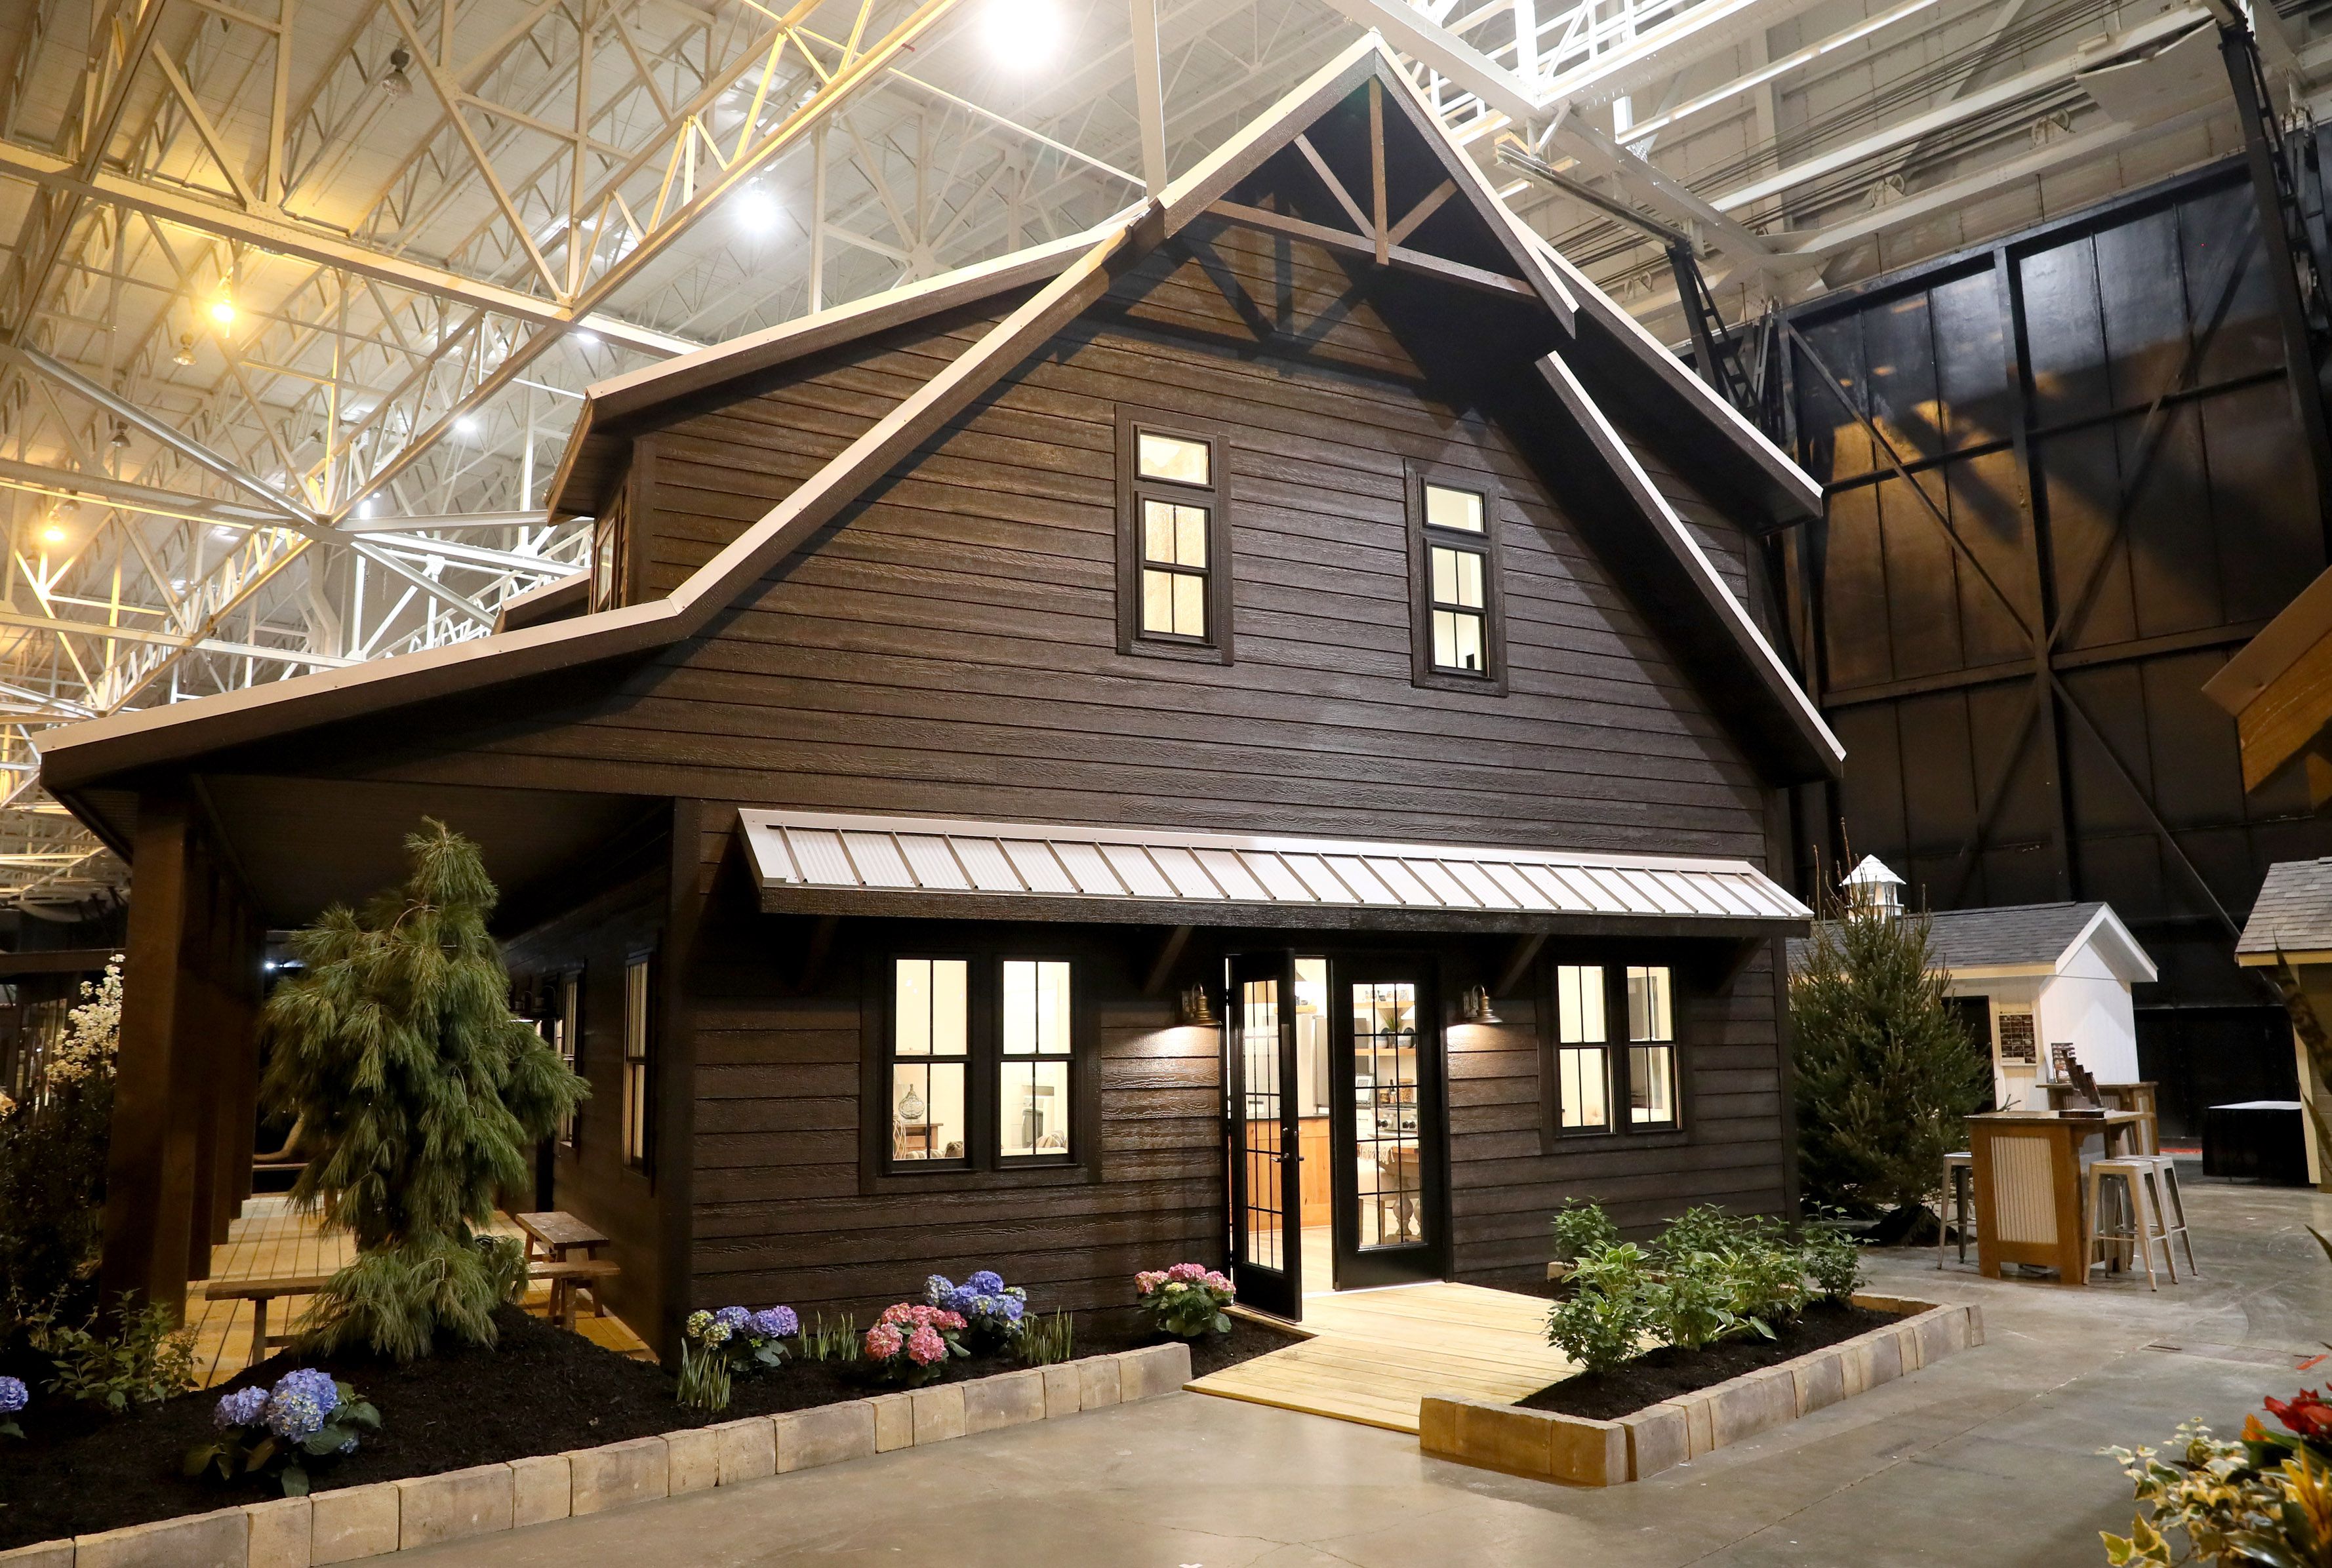 Great Big Home Garden Show Opening Friday At I X Center